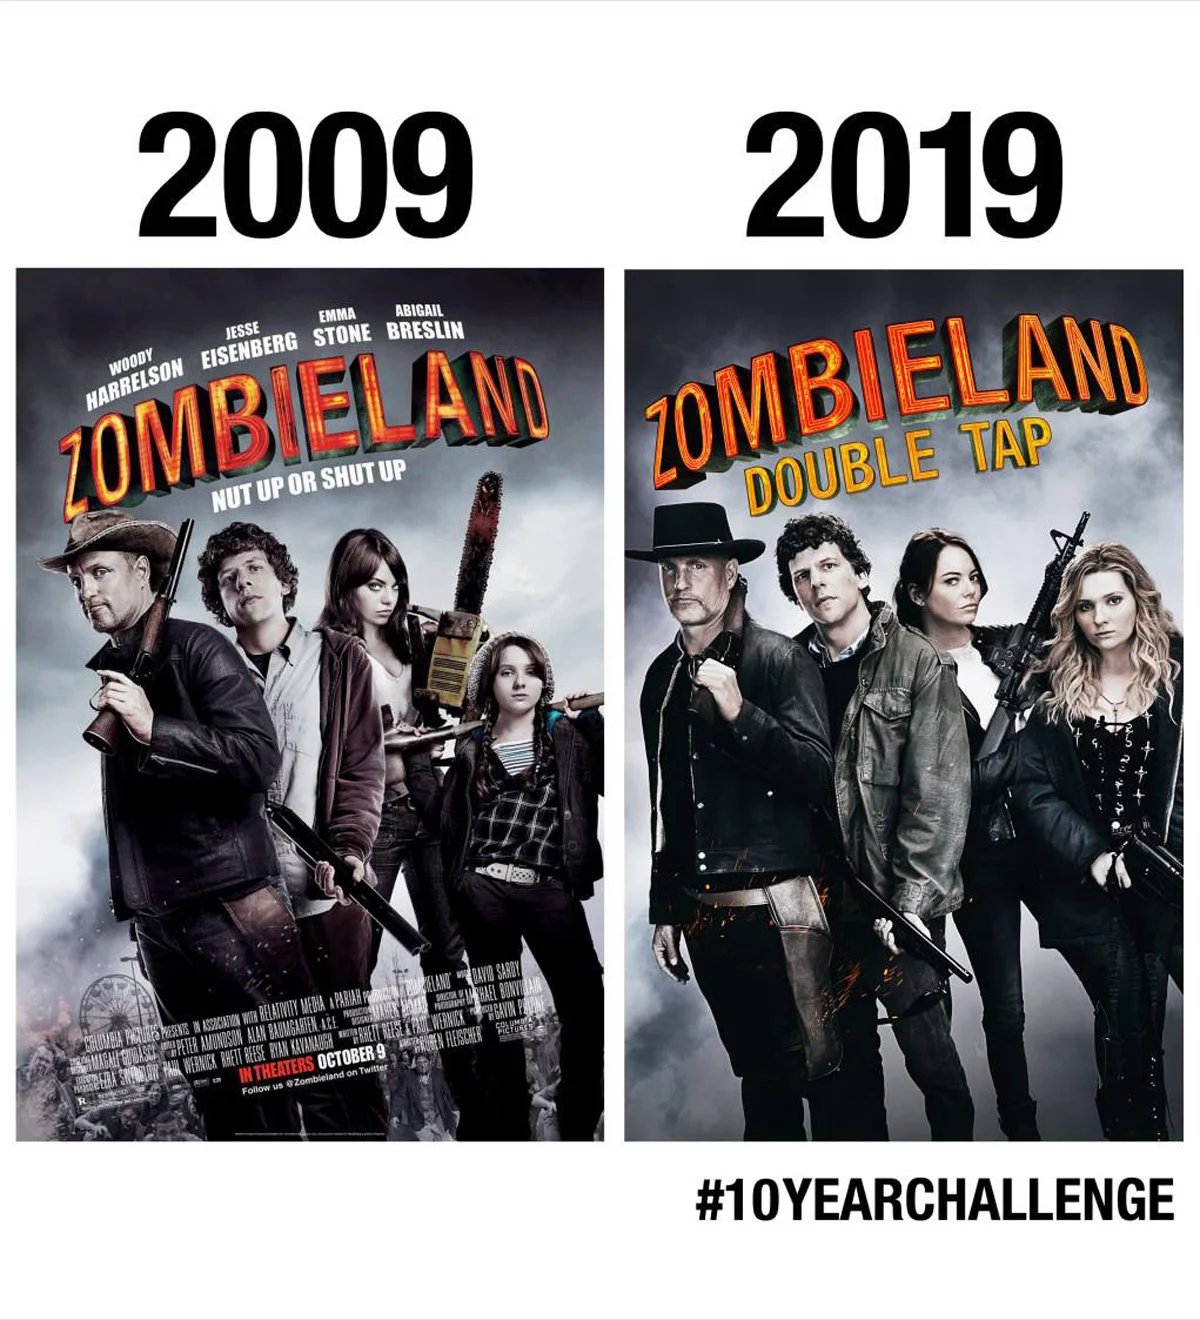 Zombieland 2 Poster & Movie Title Unveiled